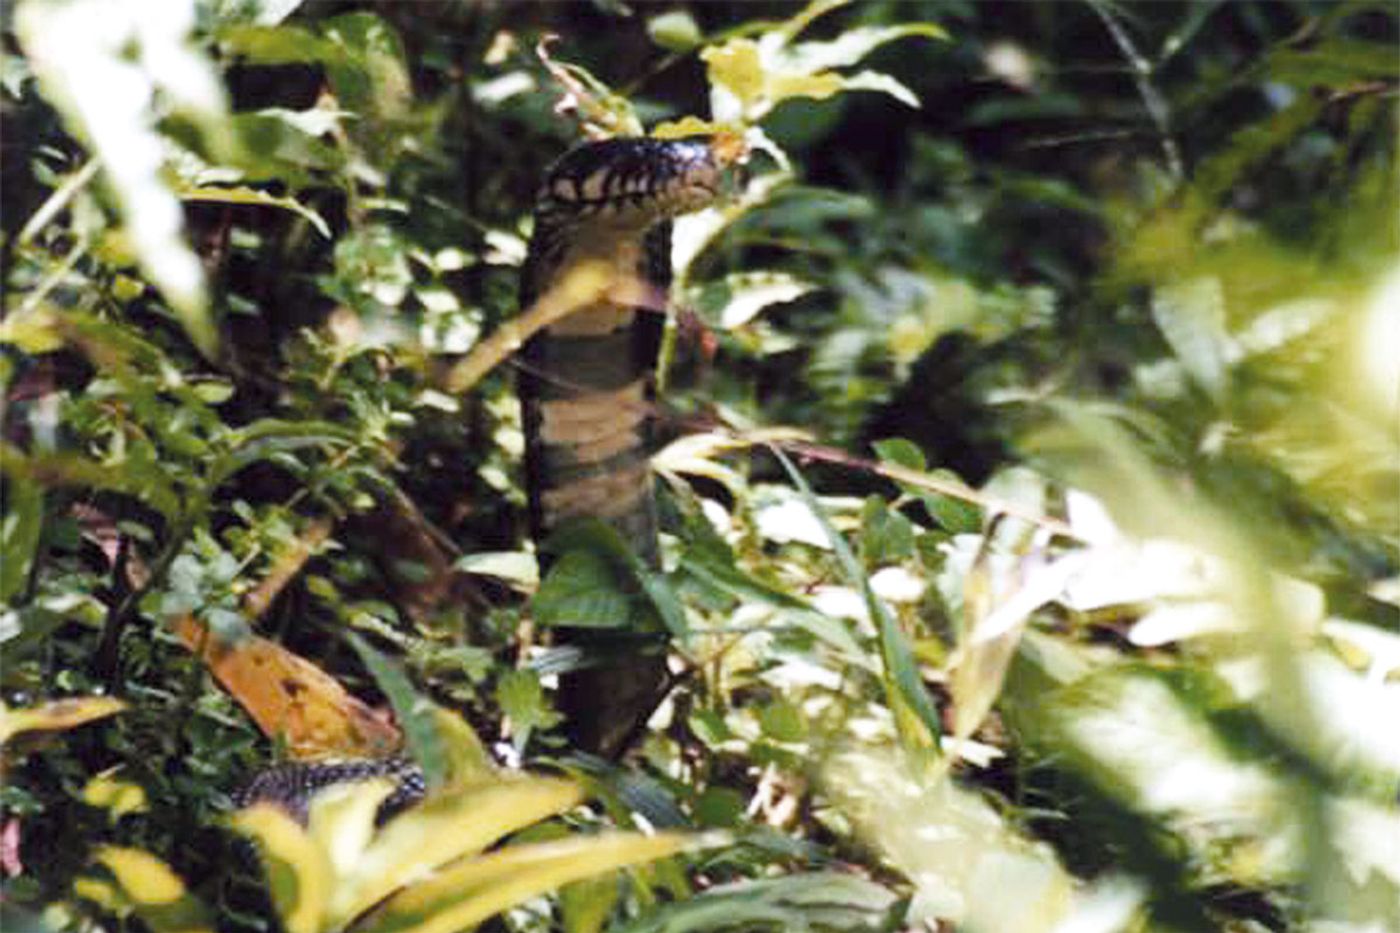 Although it may look like a forest cobra, a genetic analysis concluded that it's something entirely different.